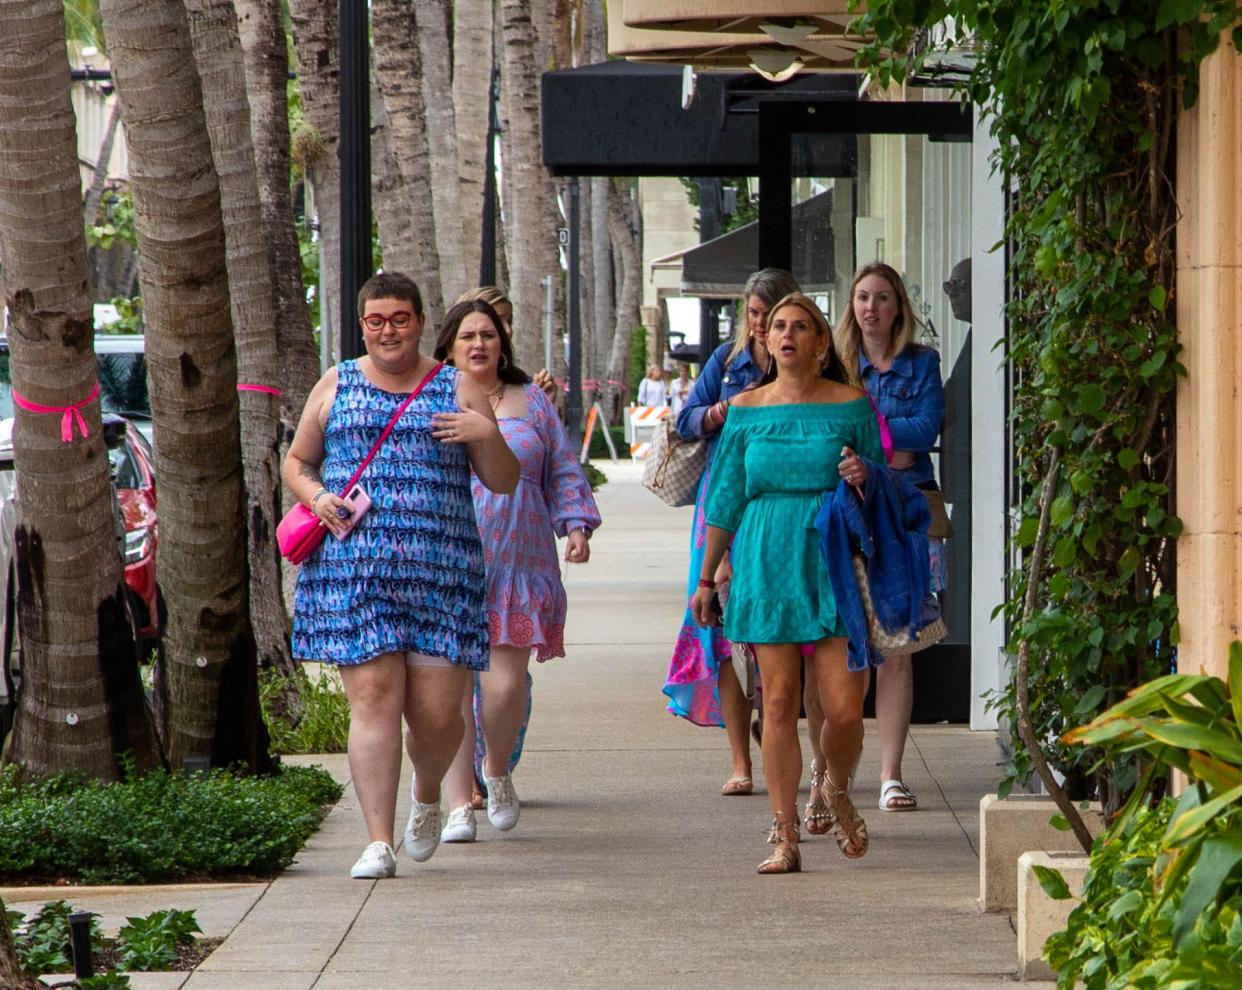 A group of women walk along Worth Avenue on Oct. 19. Like other shopping areas in town, the Avenue has no vacancies.